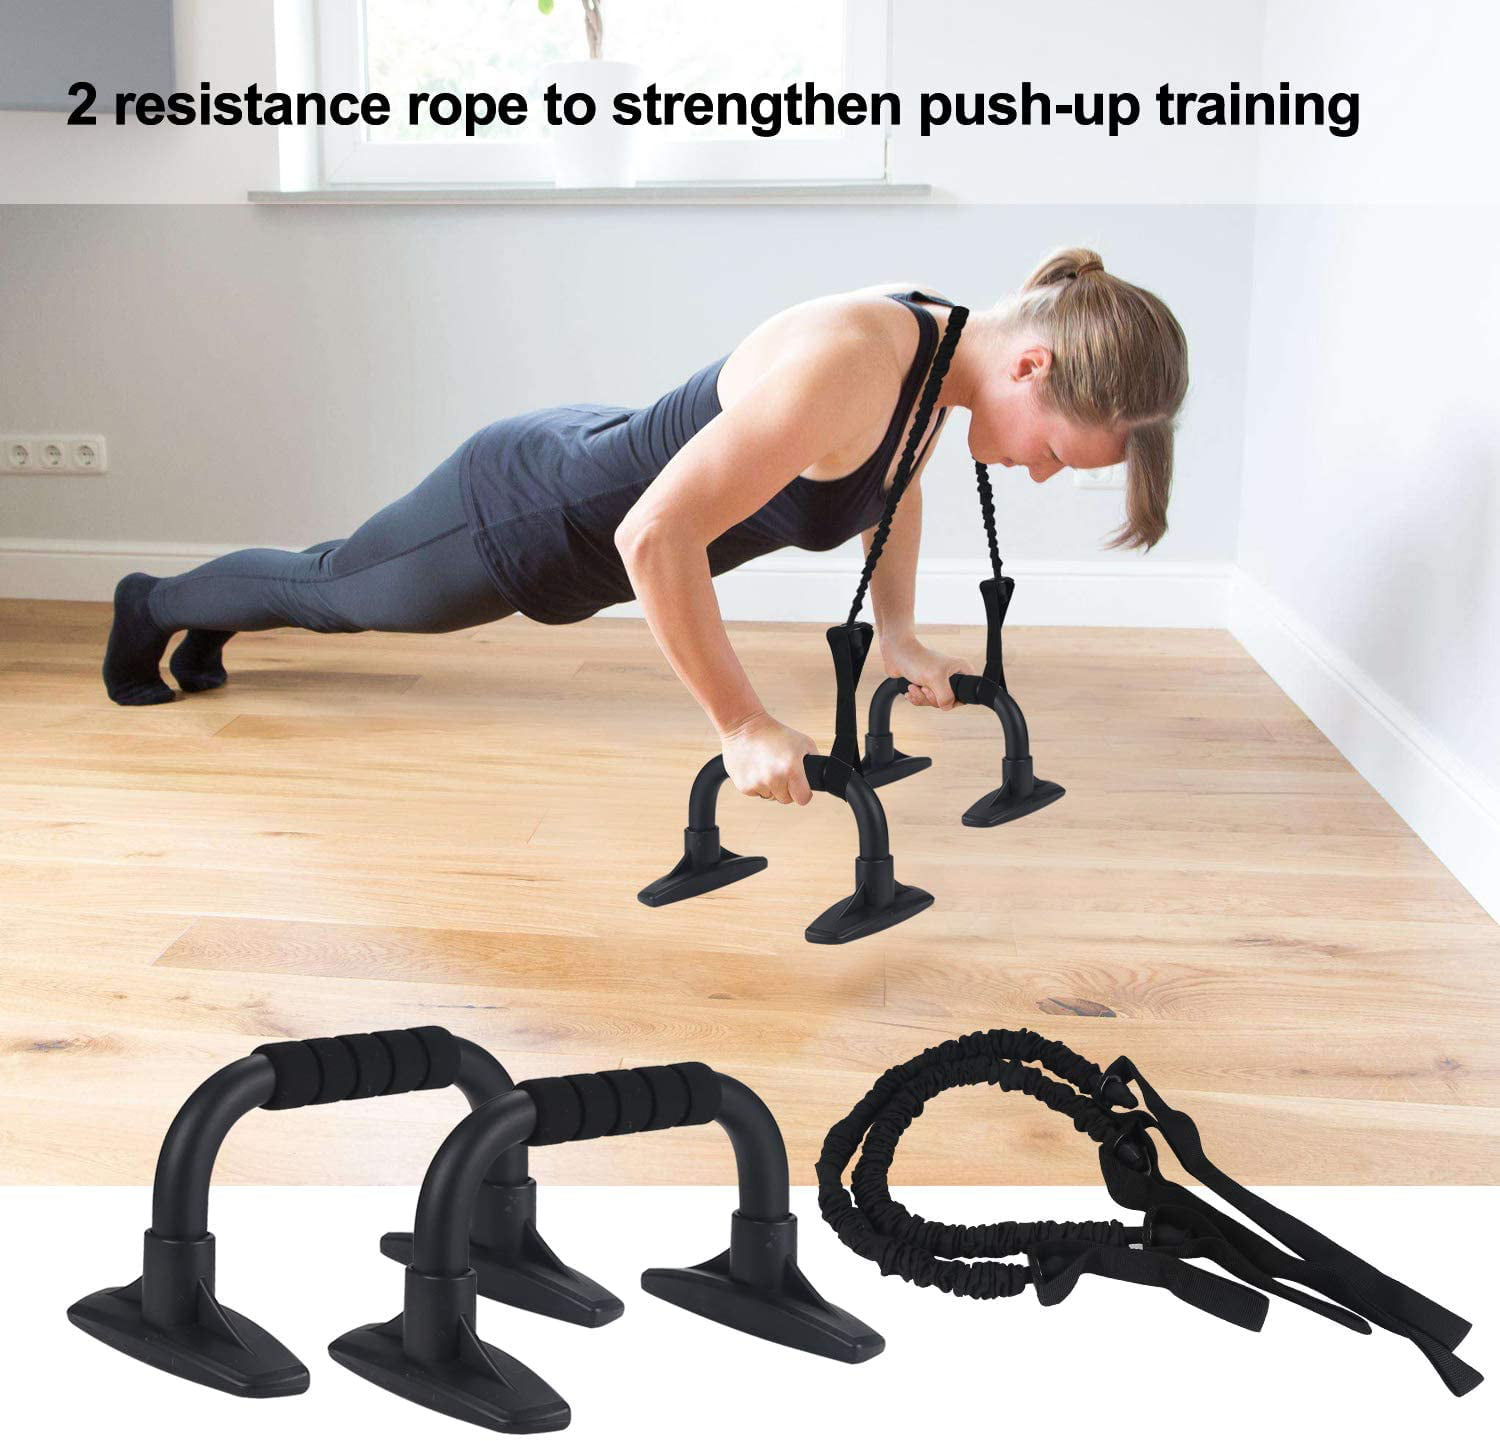 Workout Equipment for Core & Abdominal Strength Training Gonex Ab Roller Wheel Push-Up Bar Accessories for Home Gym Ab wheel with Resistance Bands Core Sliders Knee Mat 